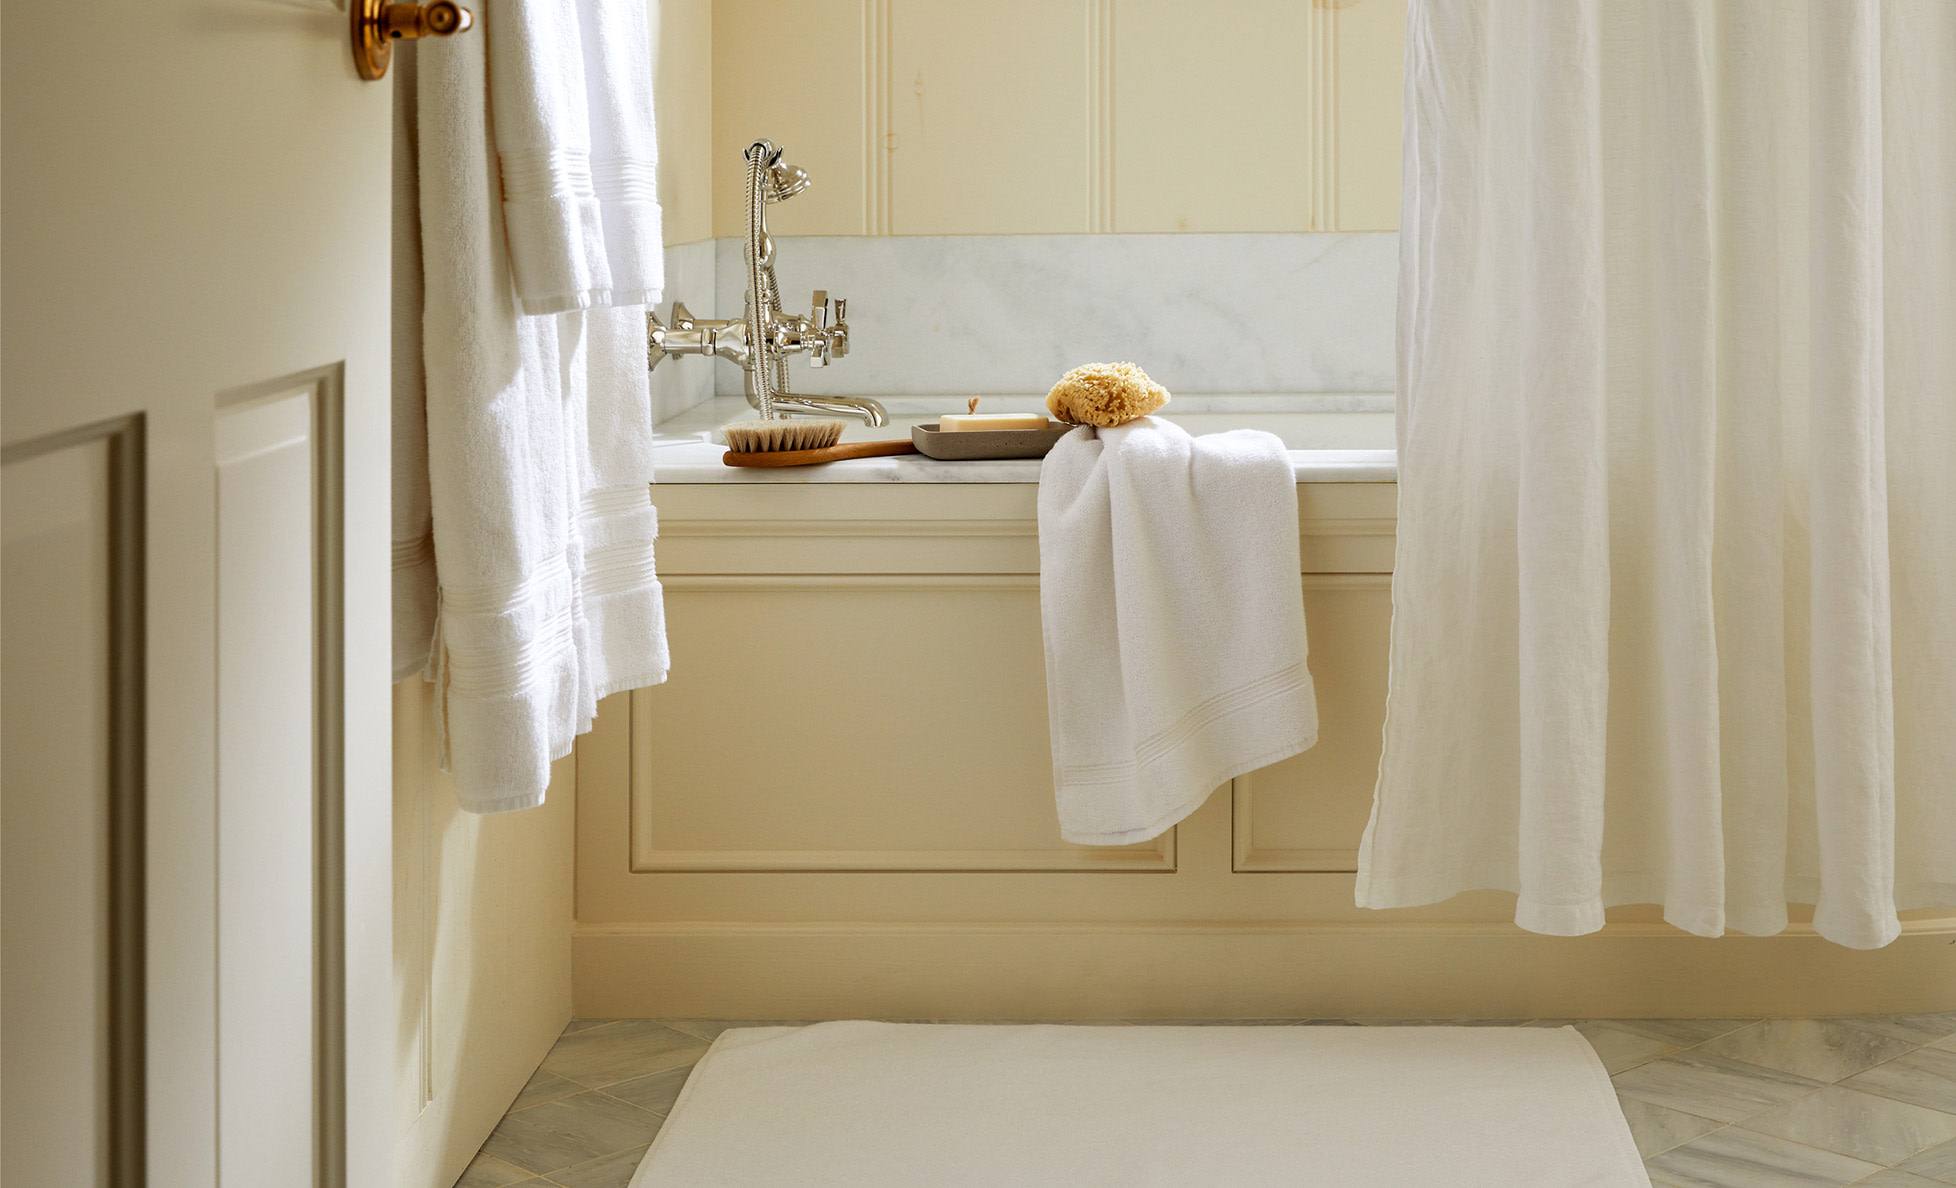 A bright bathroom with white towels